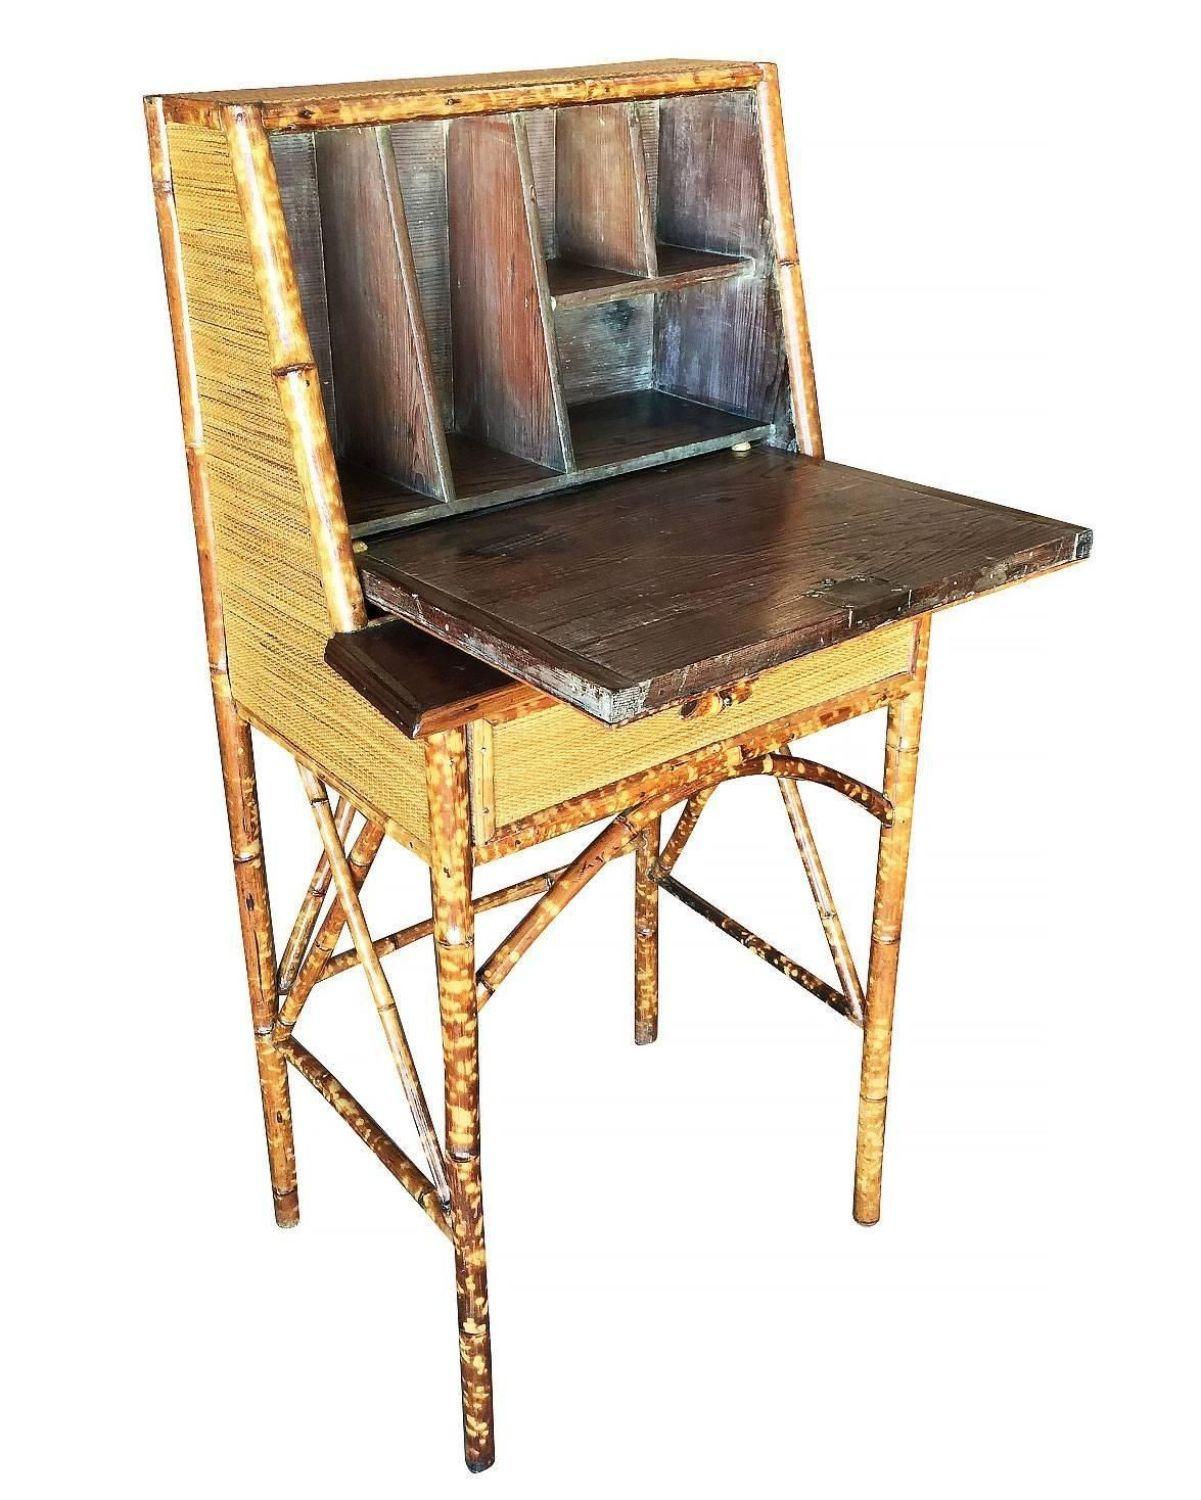 Tiger bamboo secretary desk with handwoven rice mat coverings, center drawer and flip down the front opening to five smaller shelves for papers and stationery.

Restored to new for you.

All rattan, bamboo and wicker furniture has been painstakingly